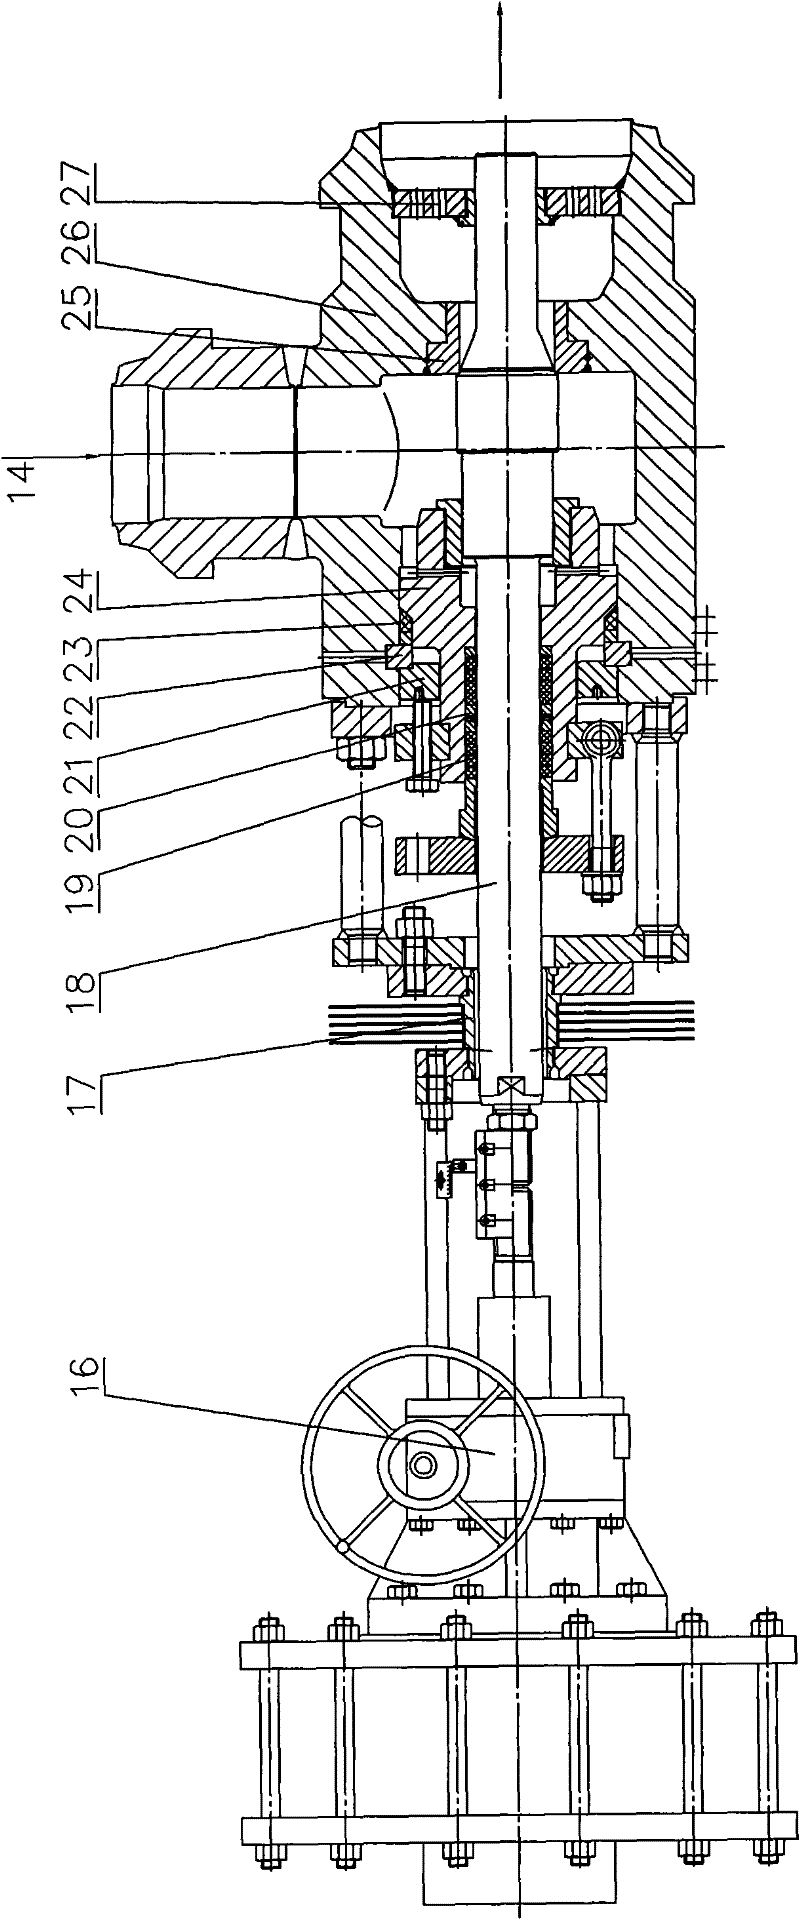 High-temperature high-pressure temperature-reducing pressure-reducing device capable of being started and stopped rapidly